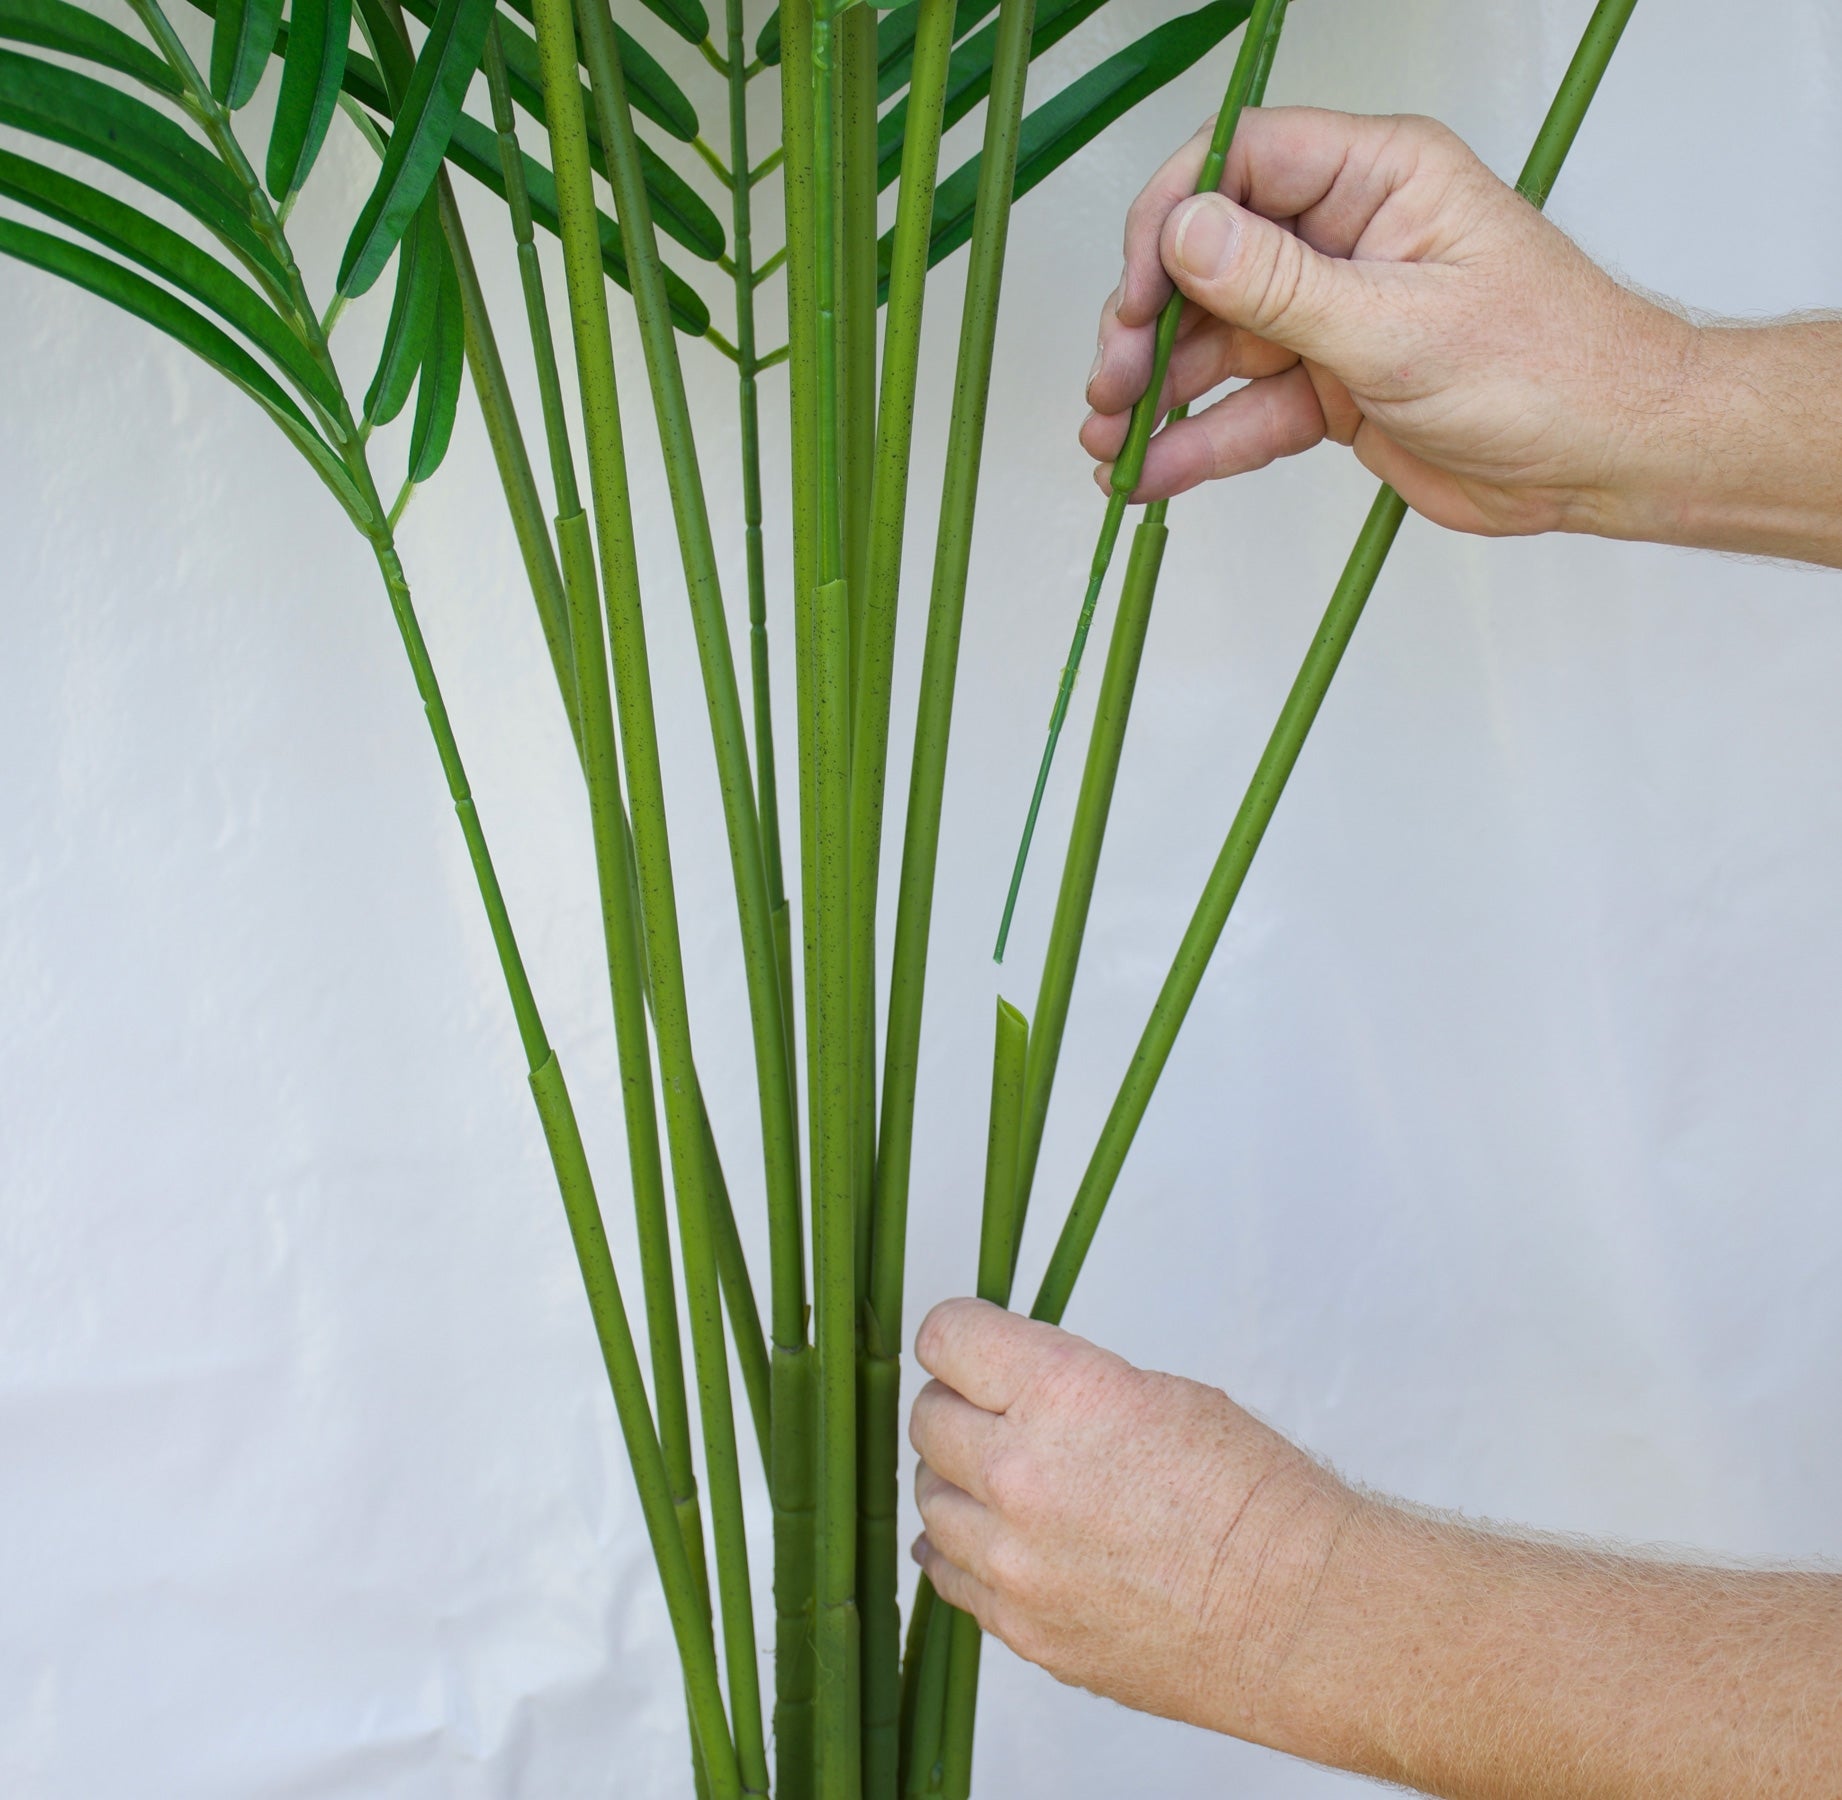 How to attach the stems to the Decor Flowers palm.